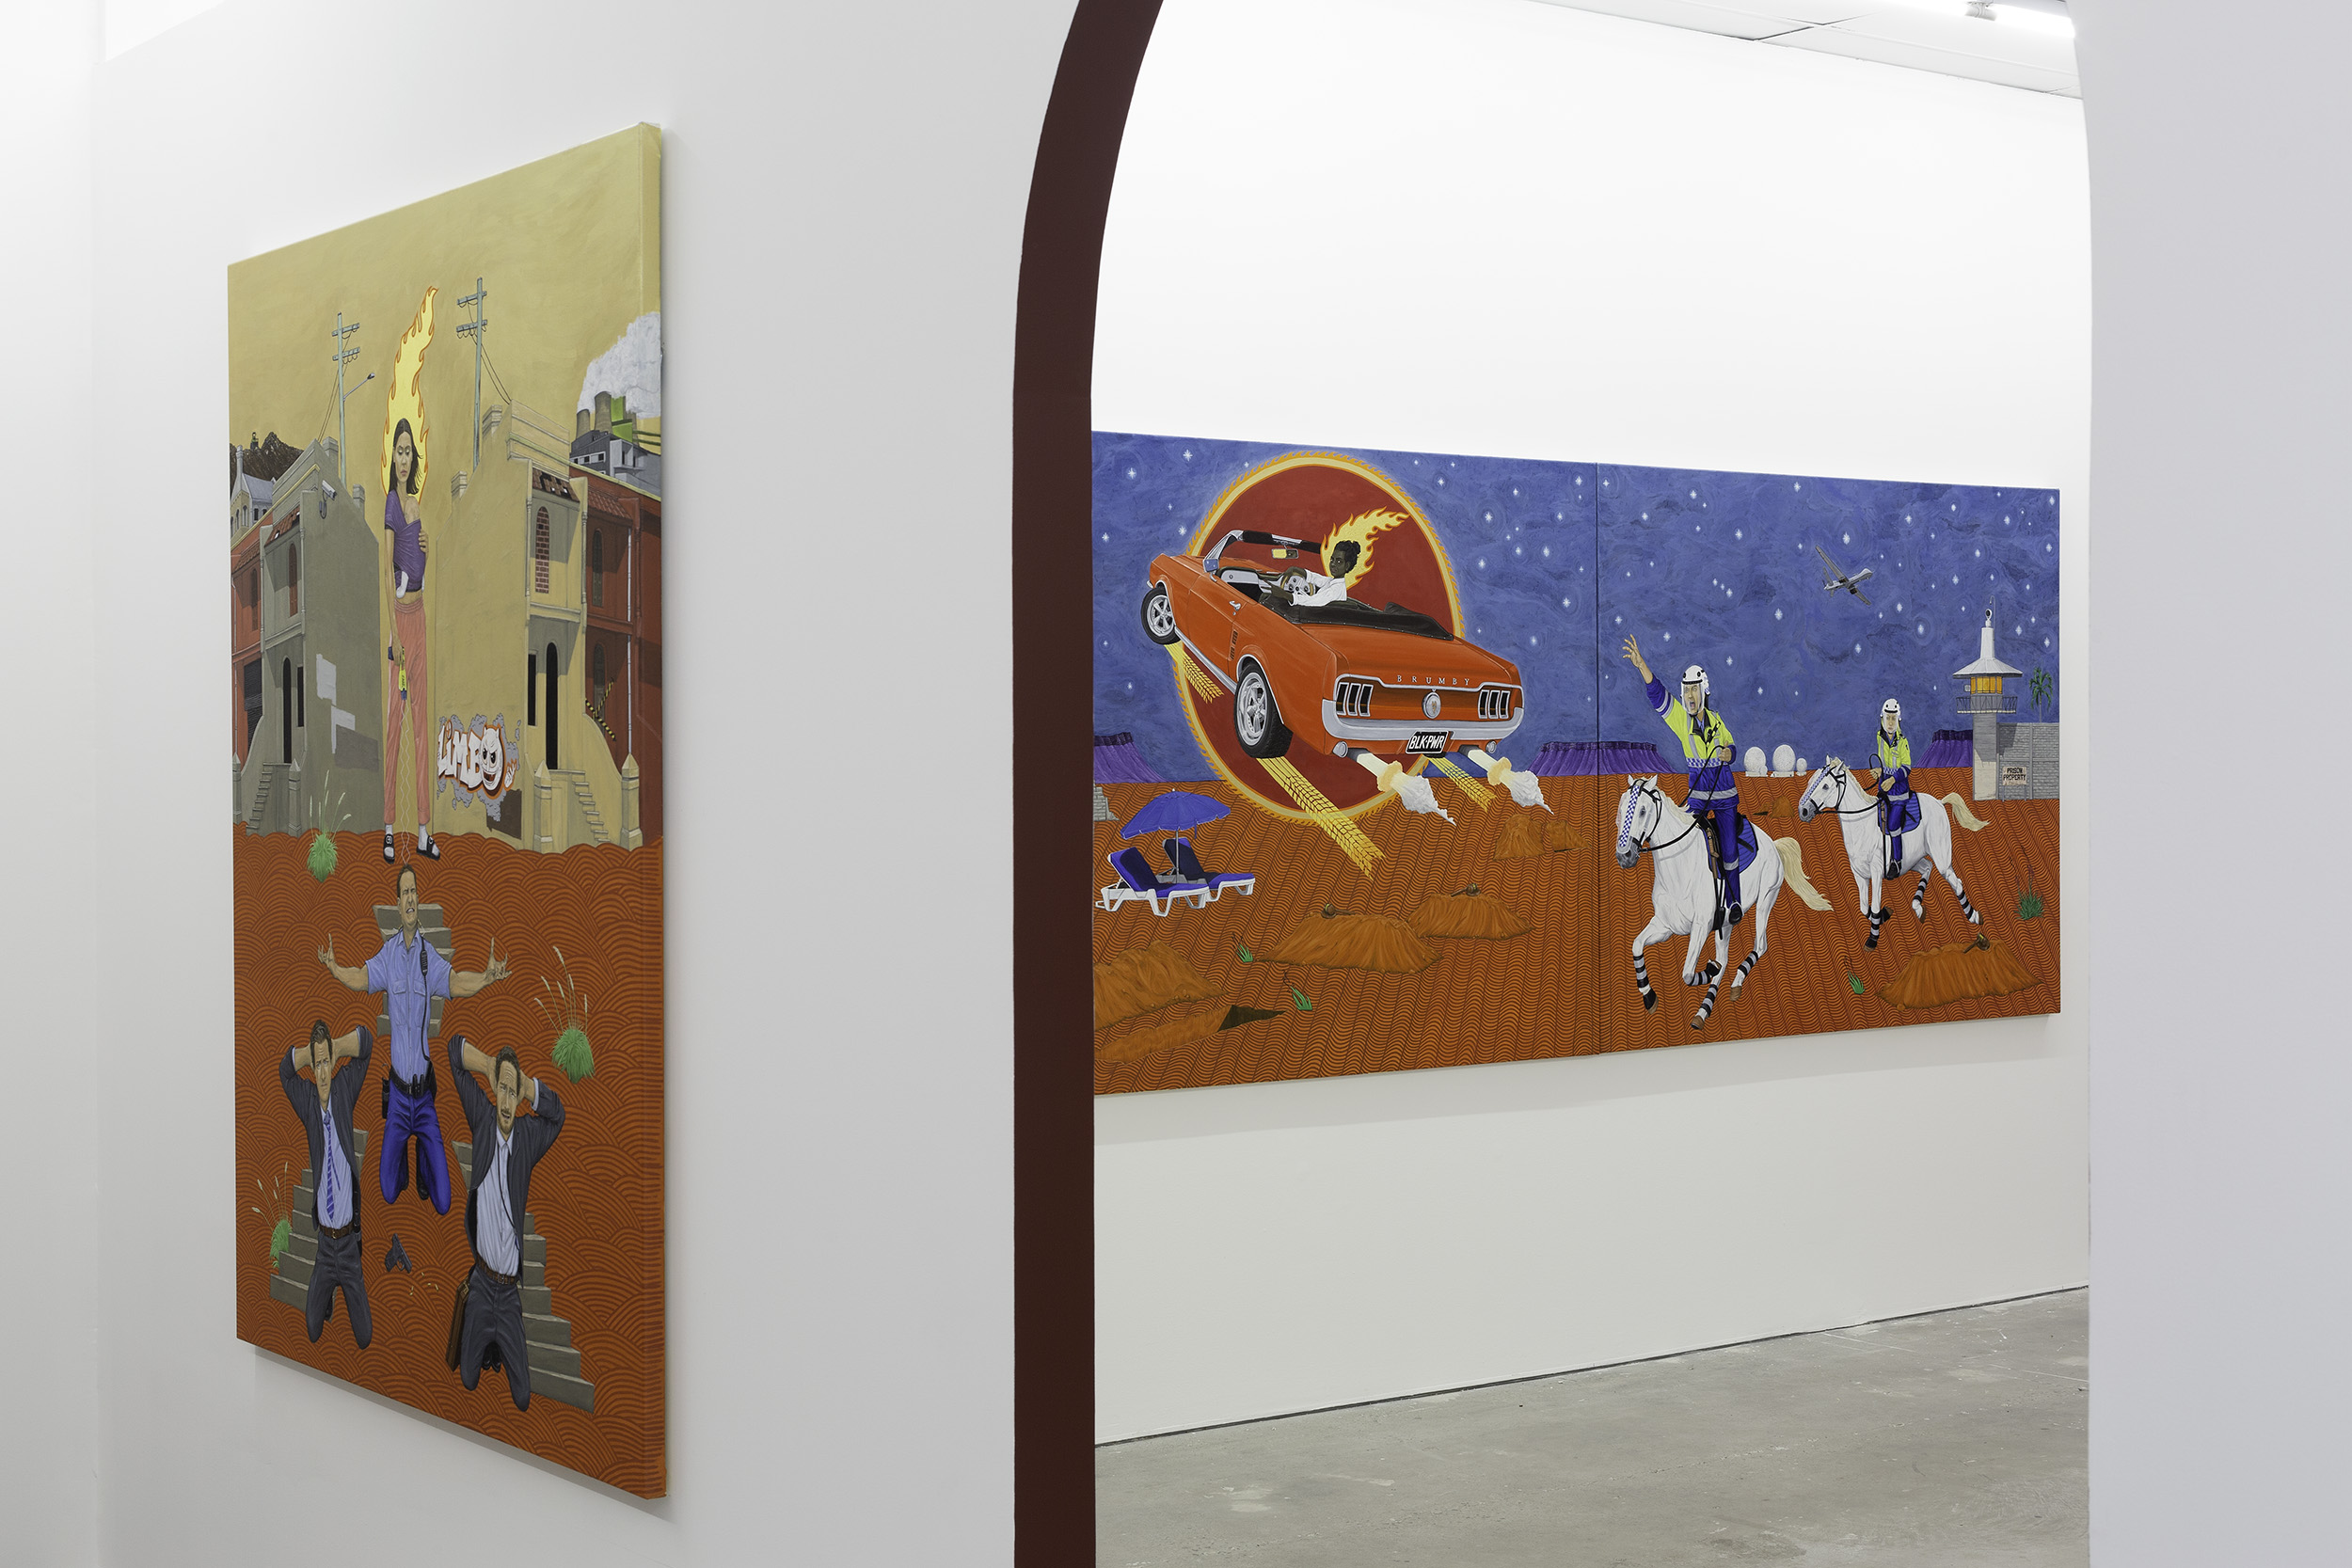 Installation view of Ryan Presley, 'Fresh Hell' at Gertrude Contemporary, 2023. Photo: Christian Capurro.